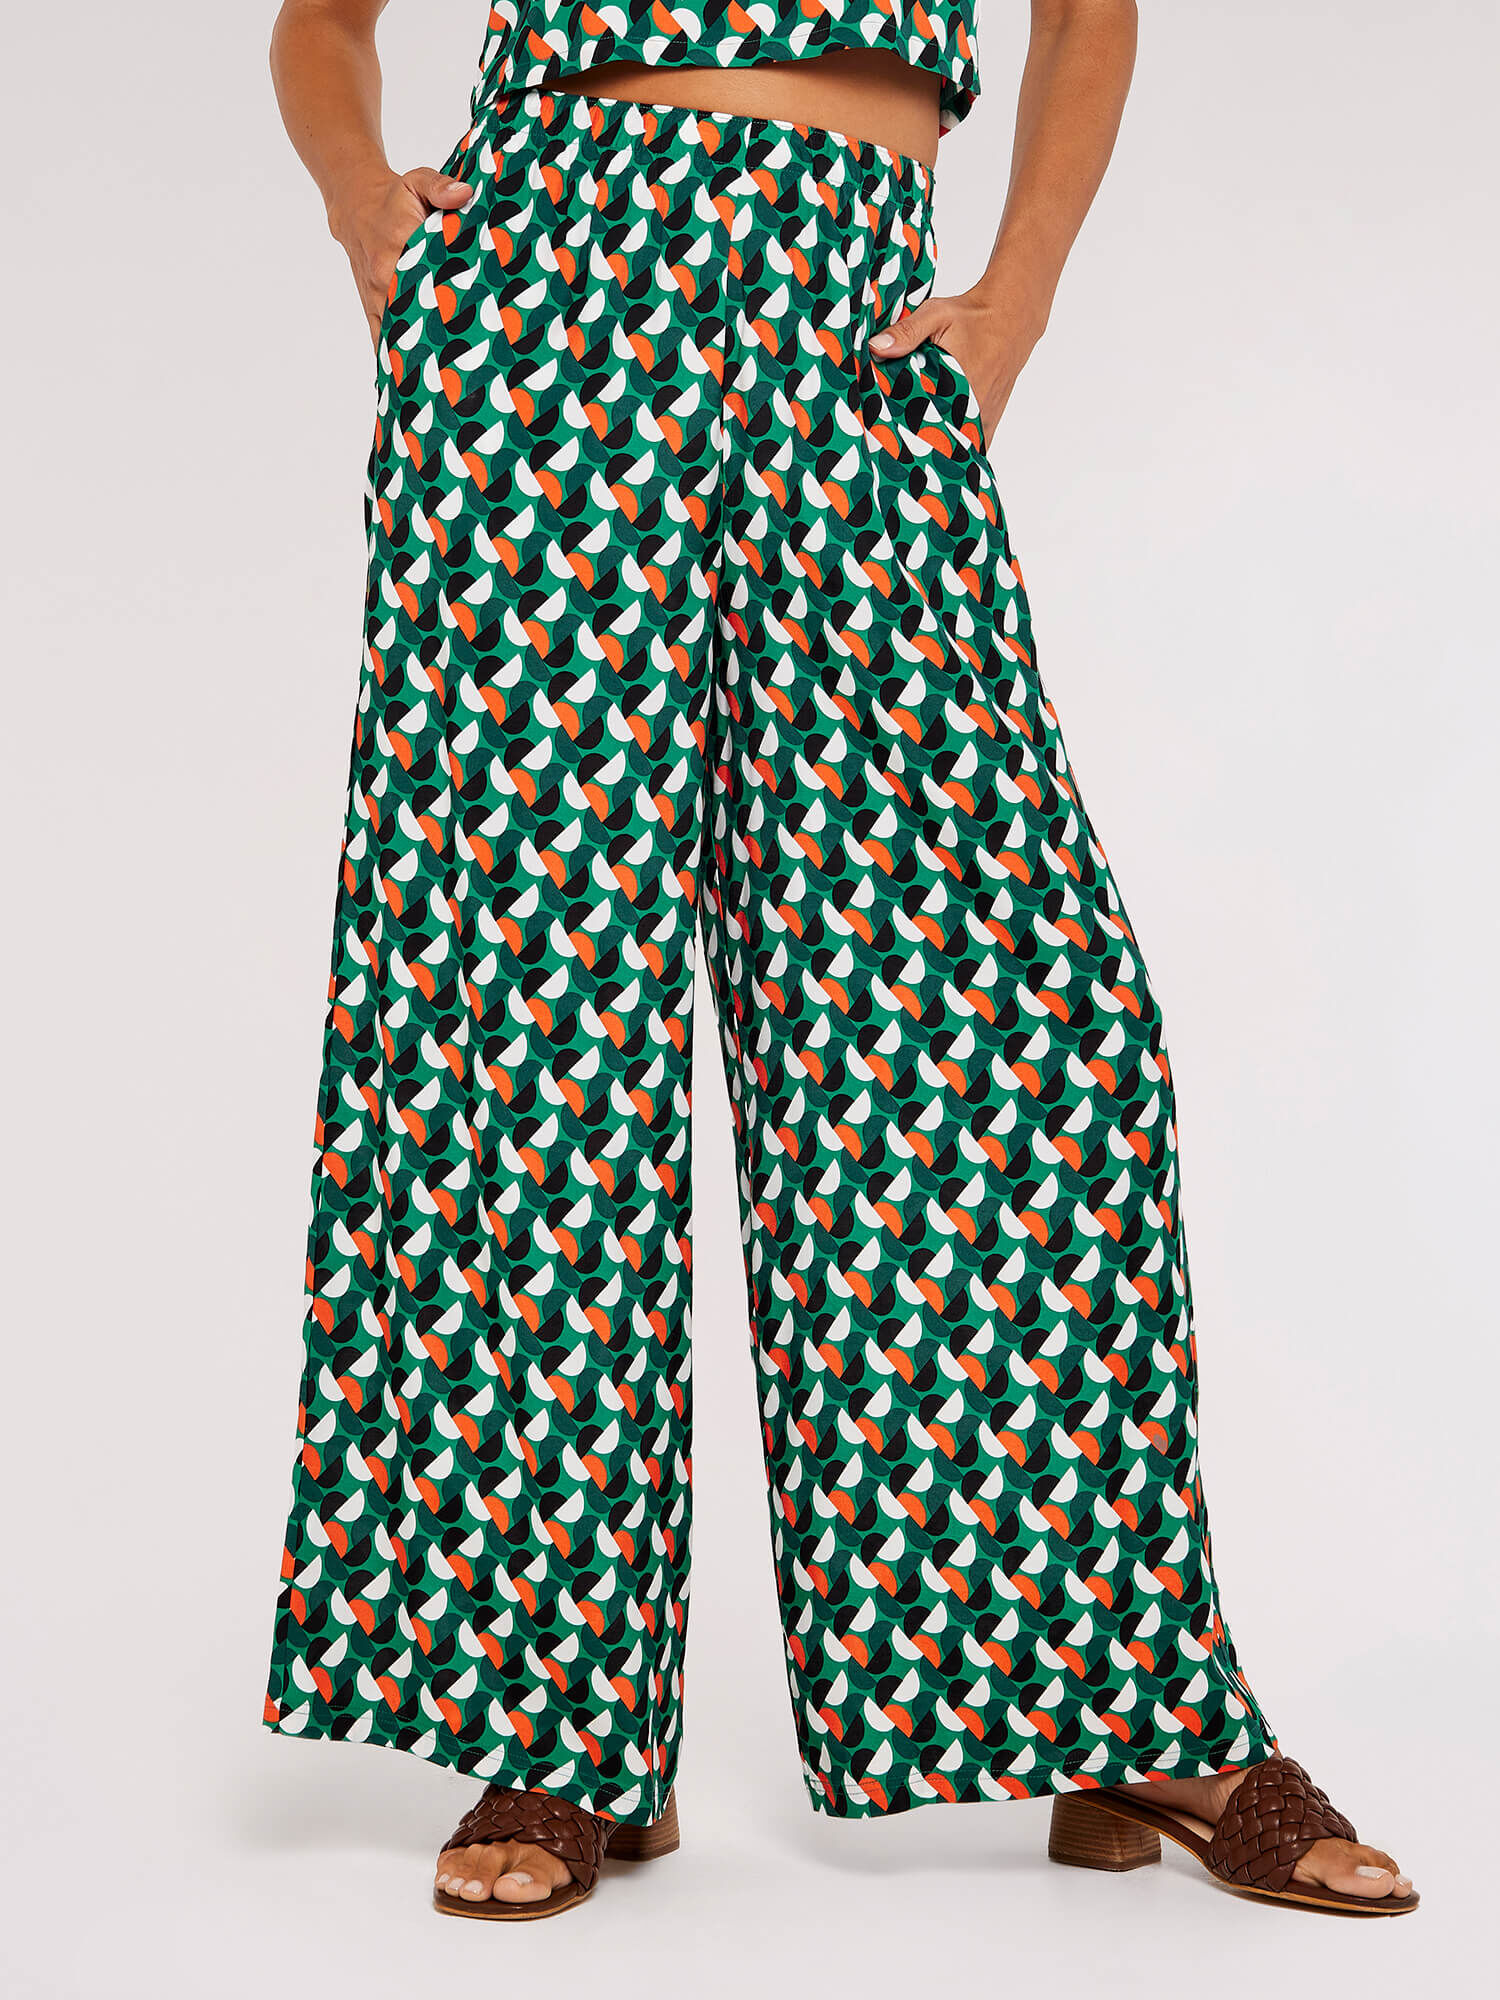 Cut-out-detail patterned trousers - Black/Green patterned - Ladies | H&M IN